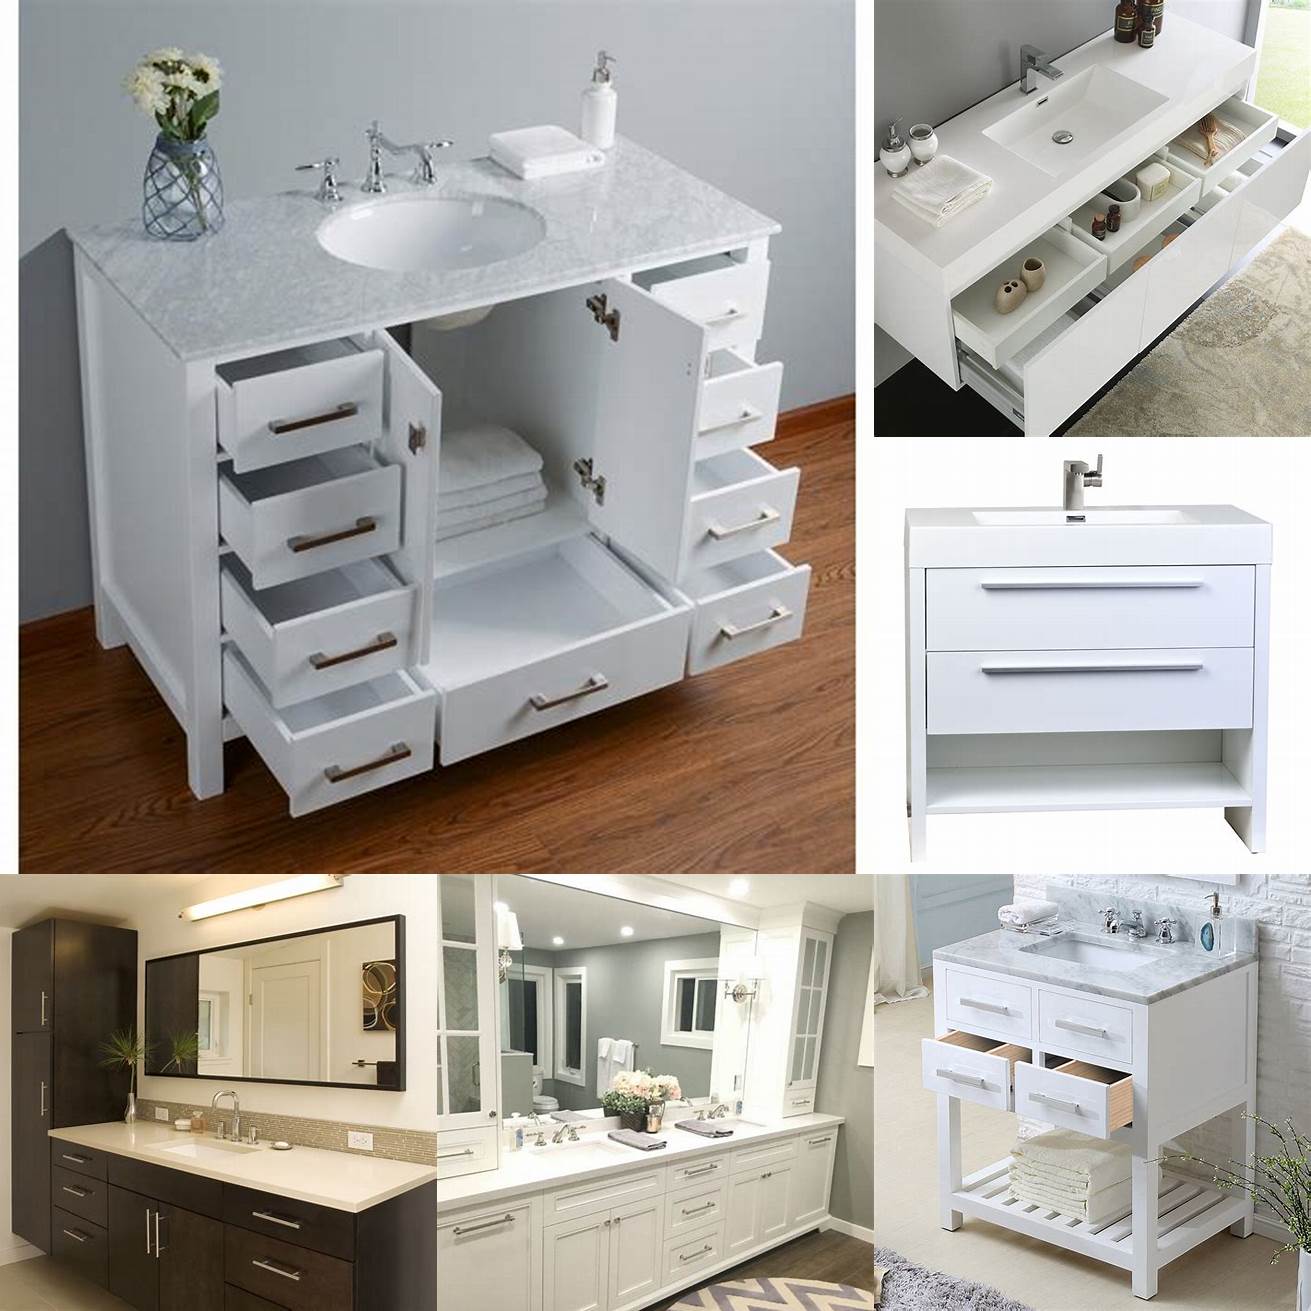 A sleek and modern white vanity with clean lines and plenty of storage